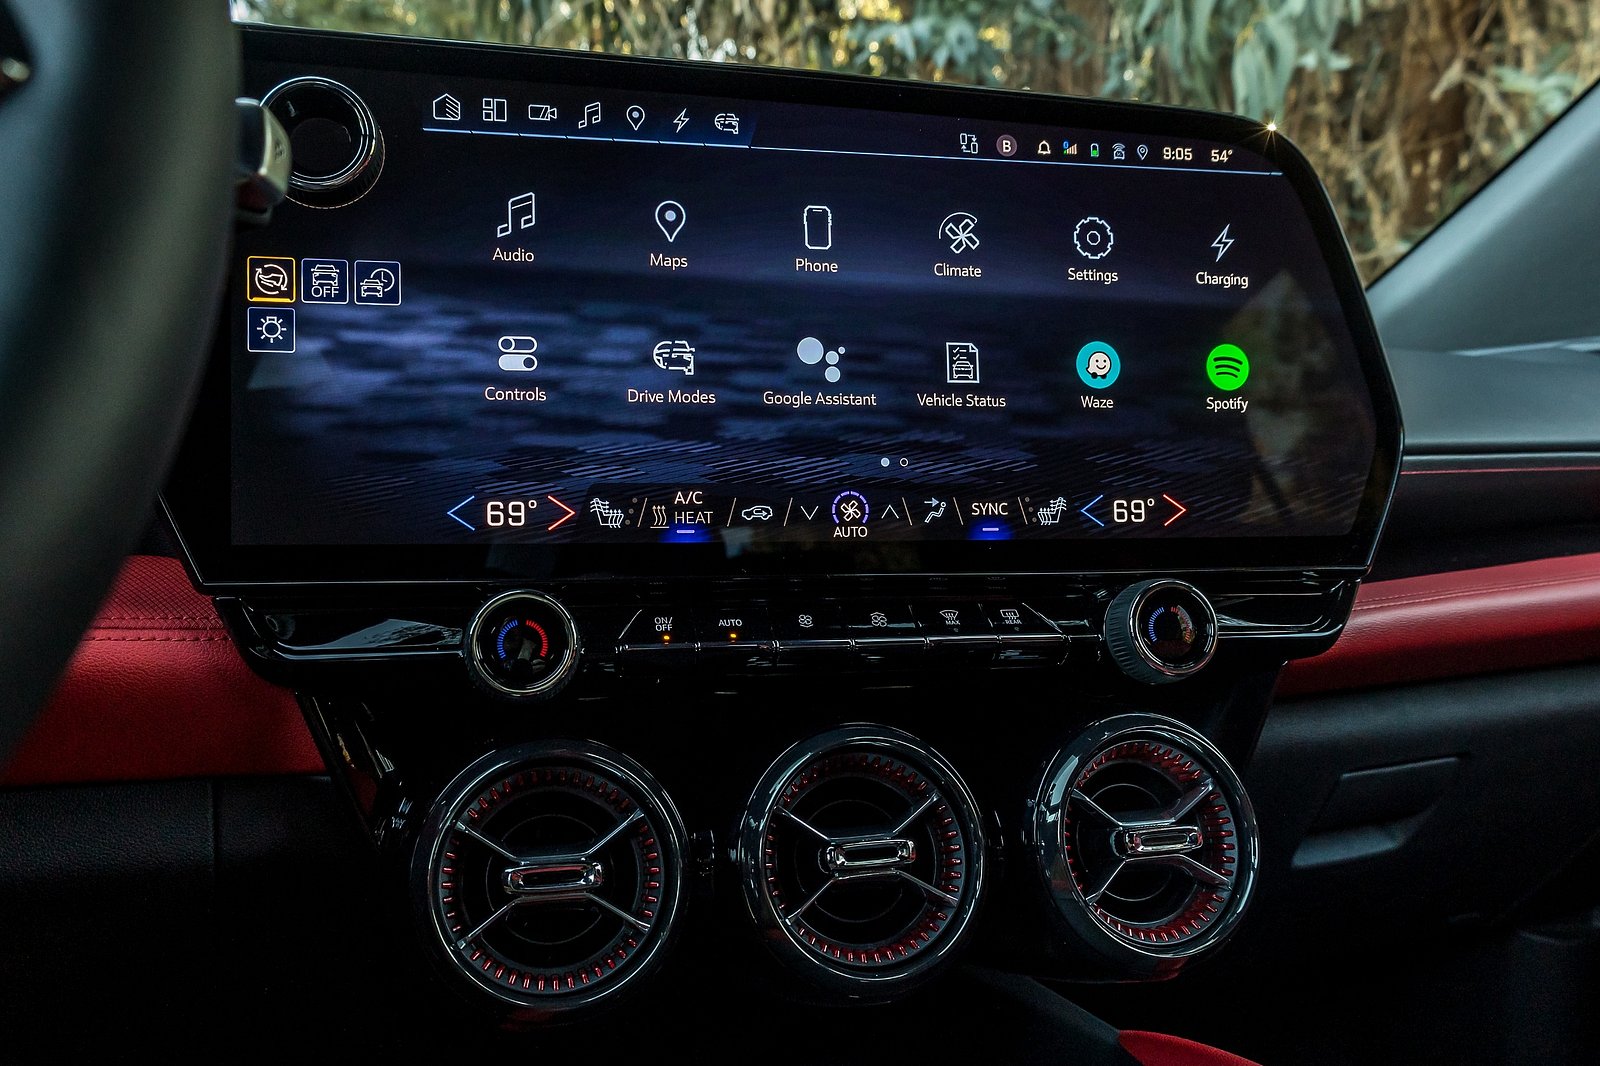 UPDATE: GM Blames Safety For Getting Rid Of Apple CarPlay And Android Auto